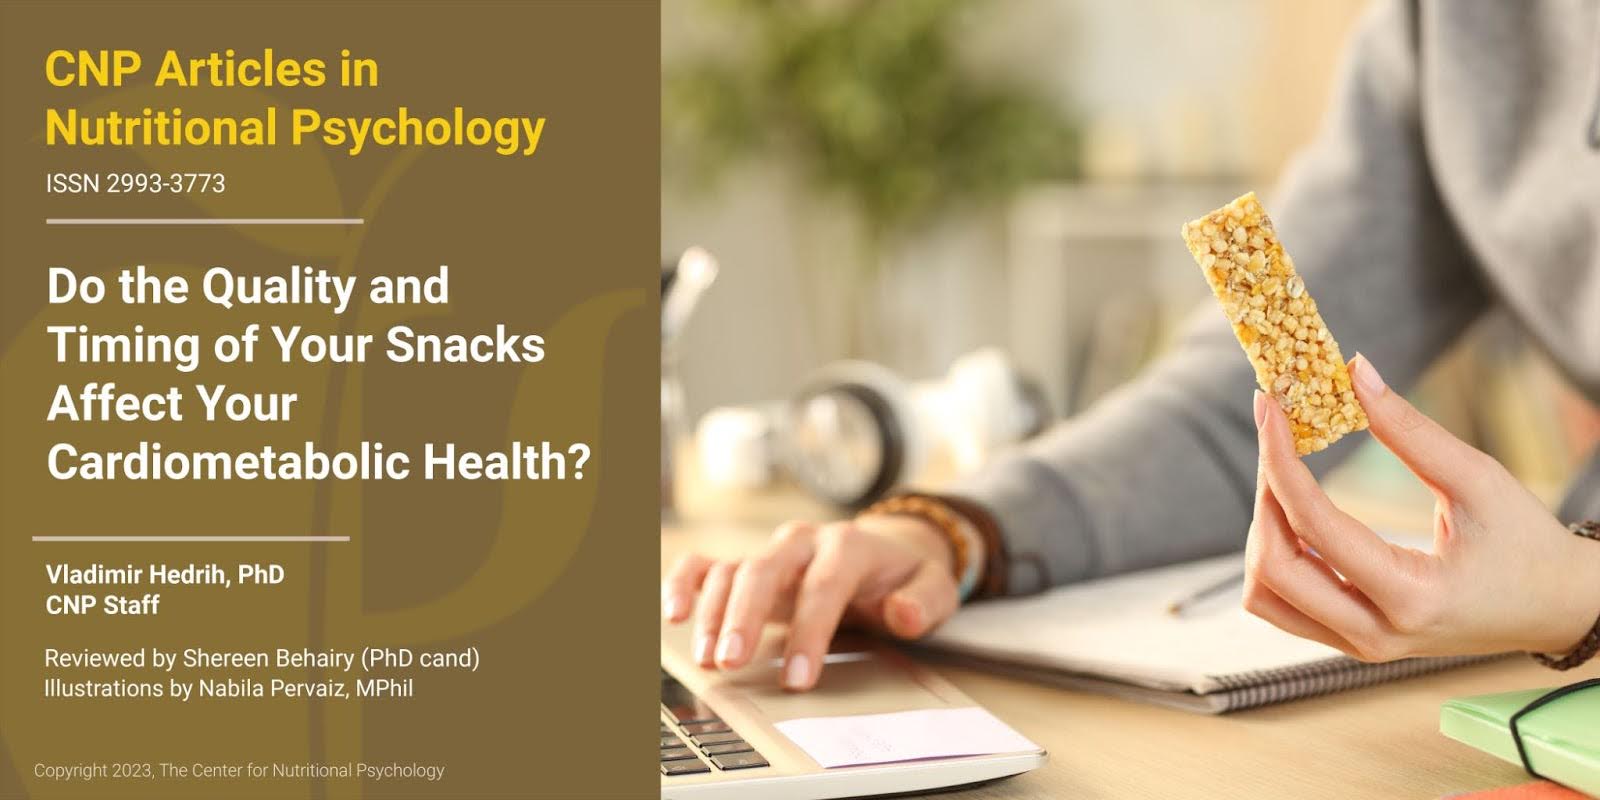 Do the Quality and Timing of Your Snacks Affect Your Cardiometabolic Health?